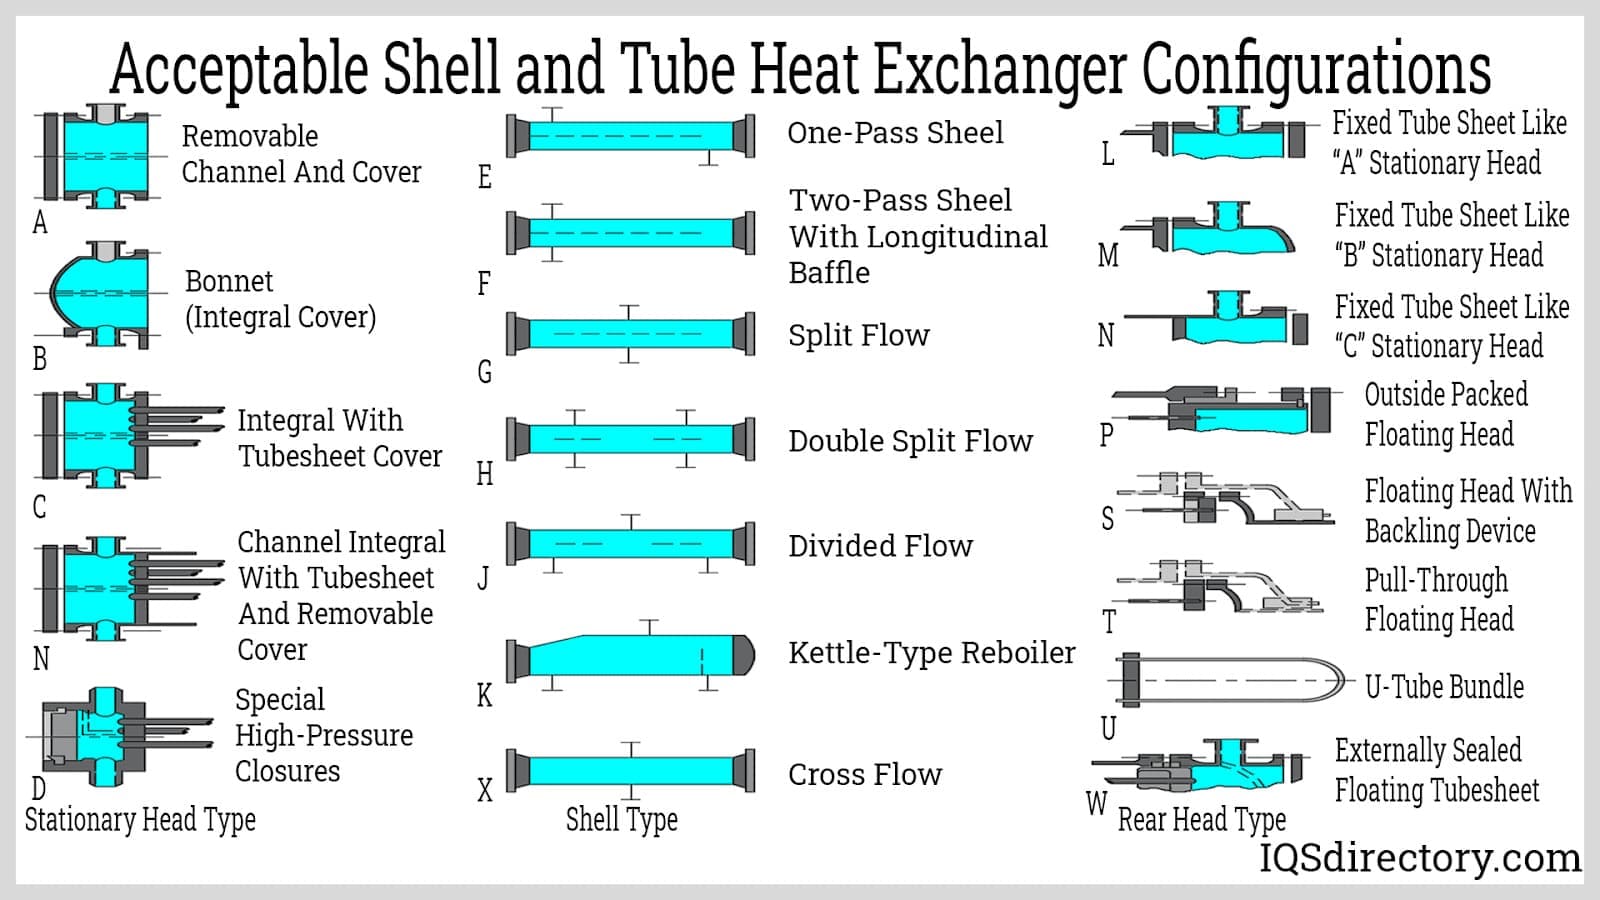 Acceptable Shell and Tube Heat Exchanger Configurations